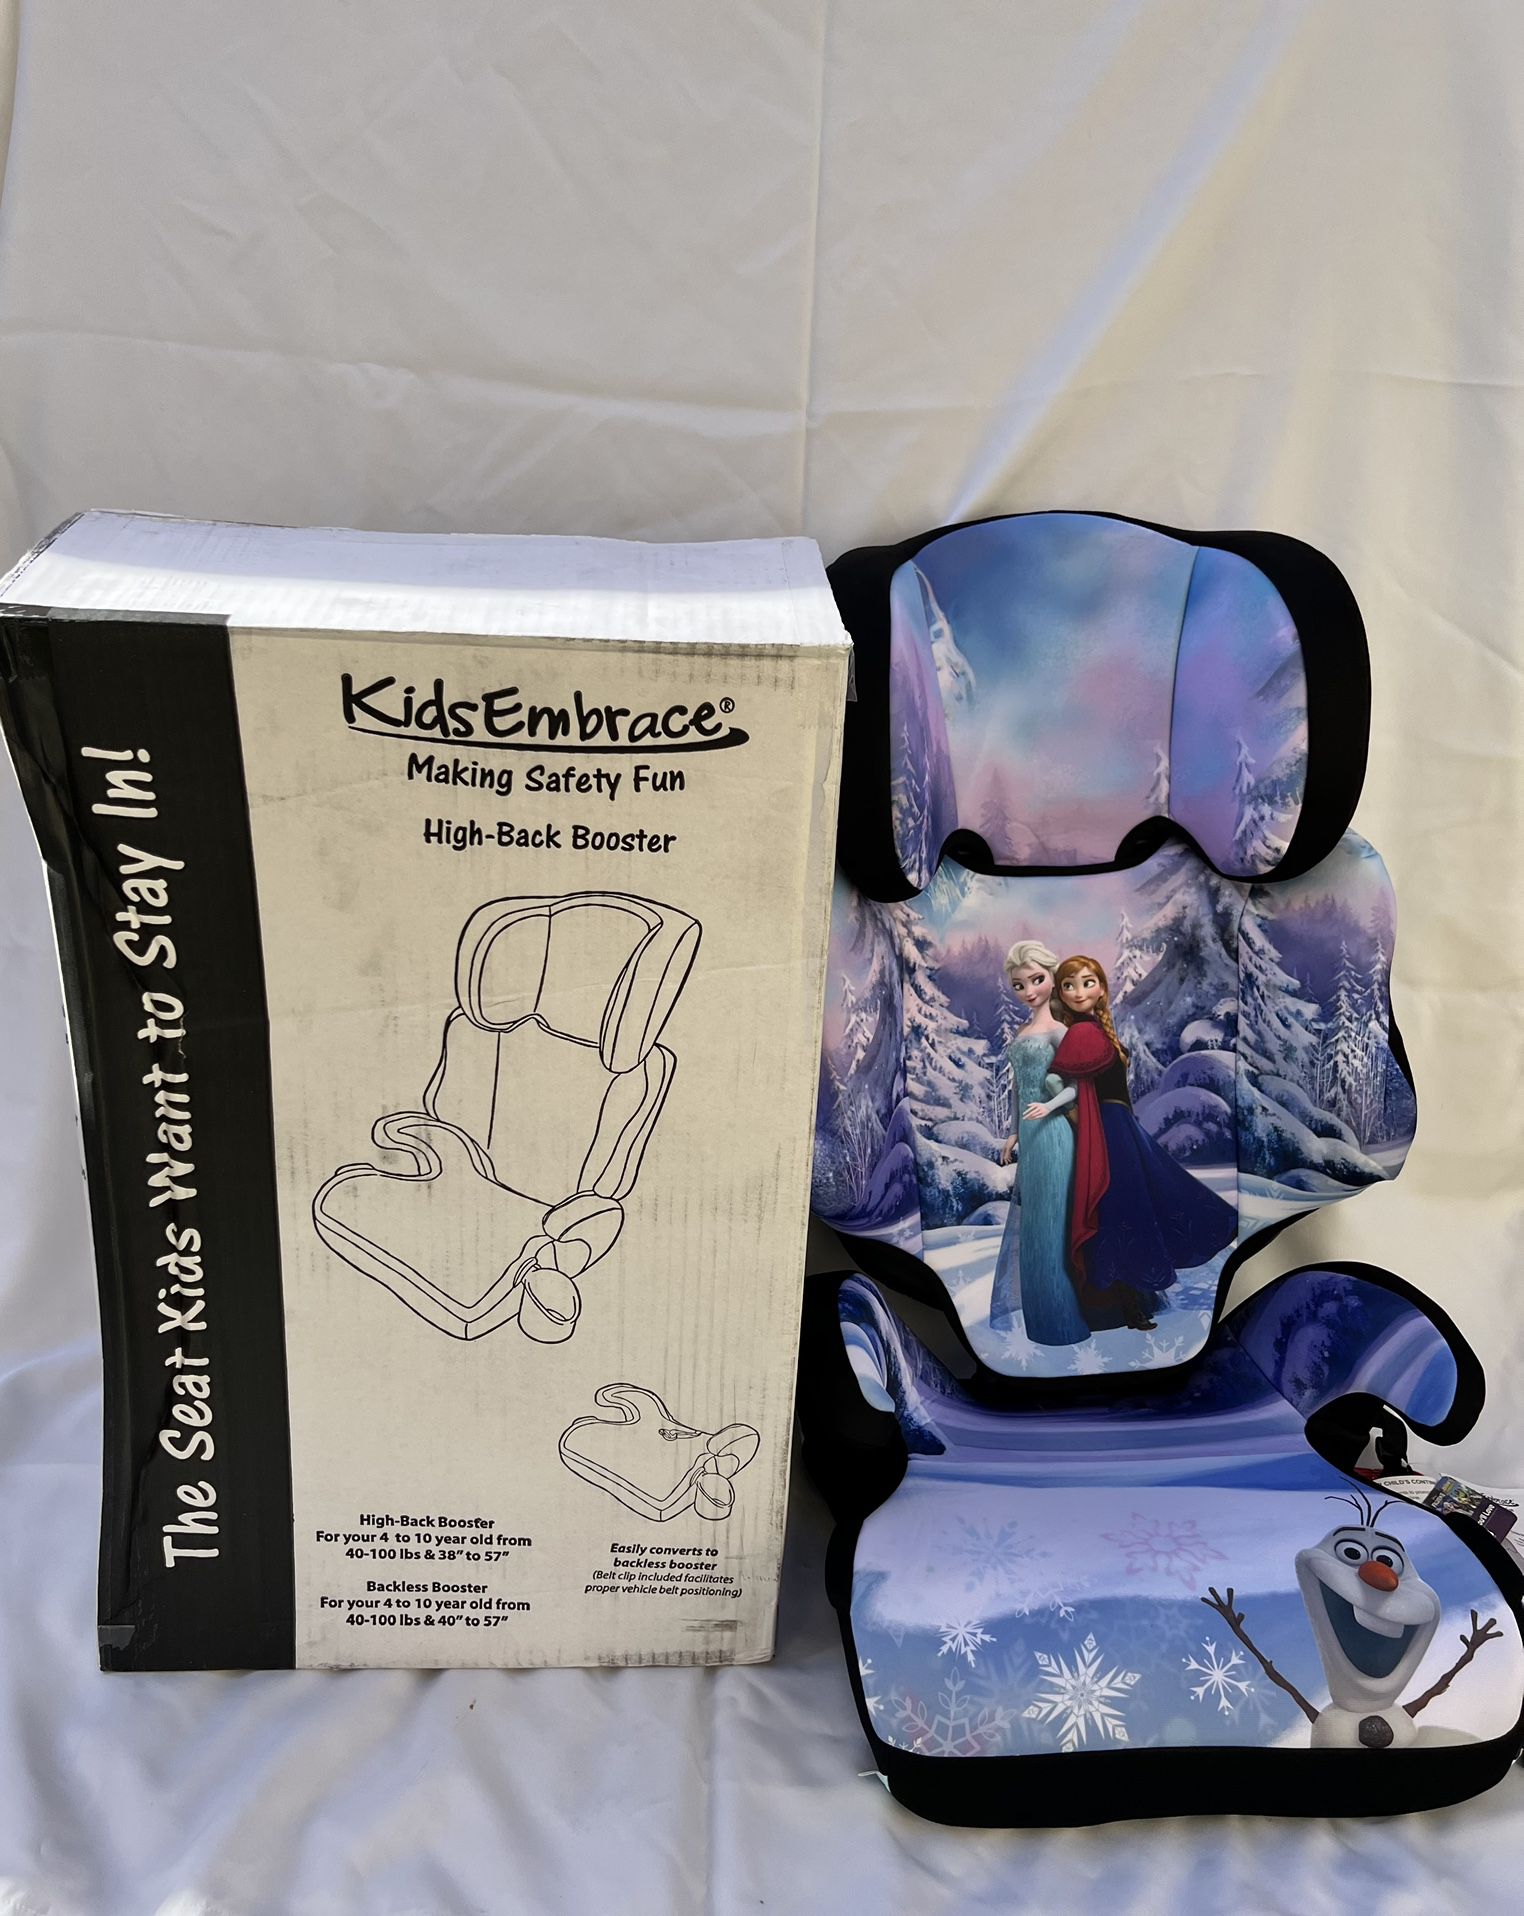 NEW with Box 2-1 Combination Carseat & Booster FROZEN Kids Embrace